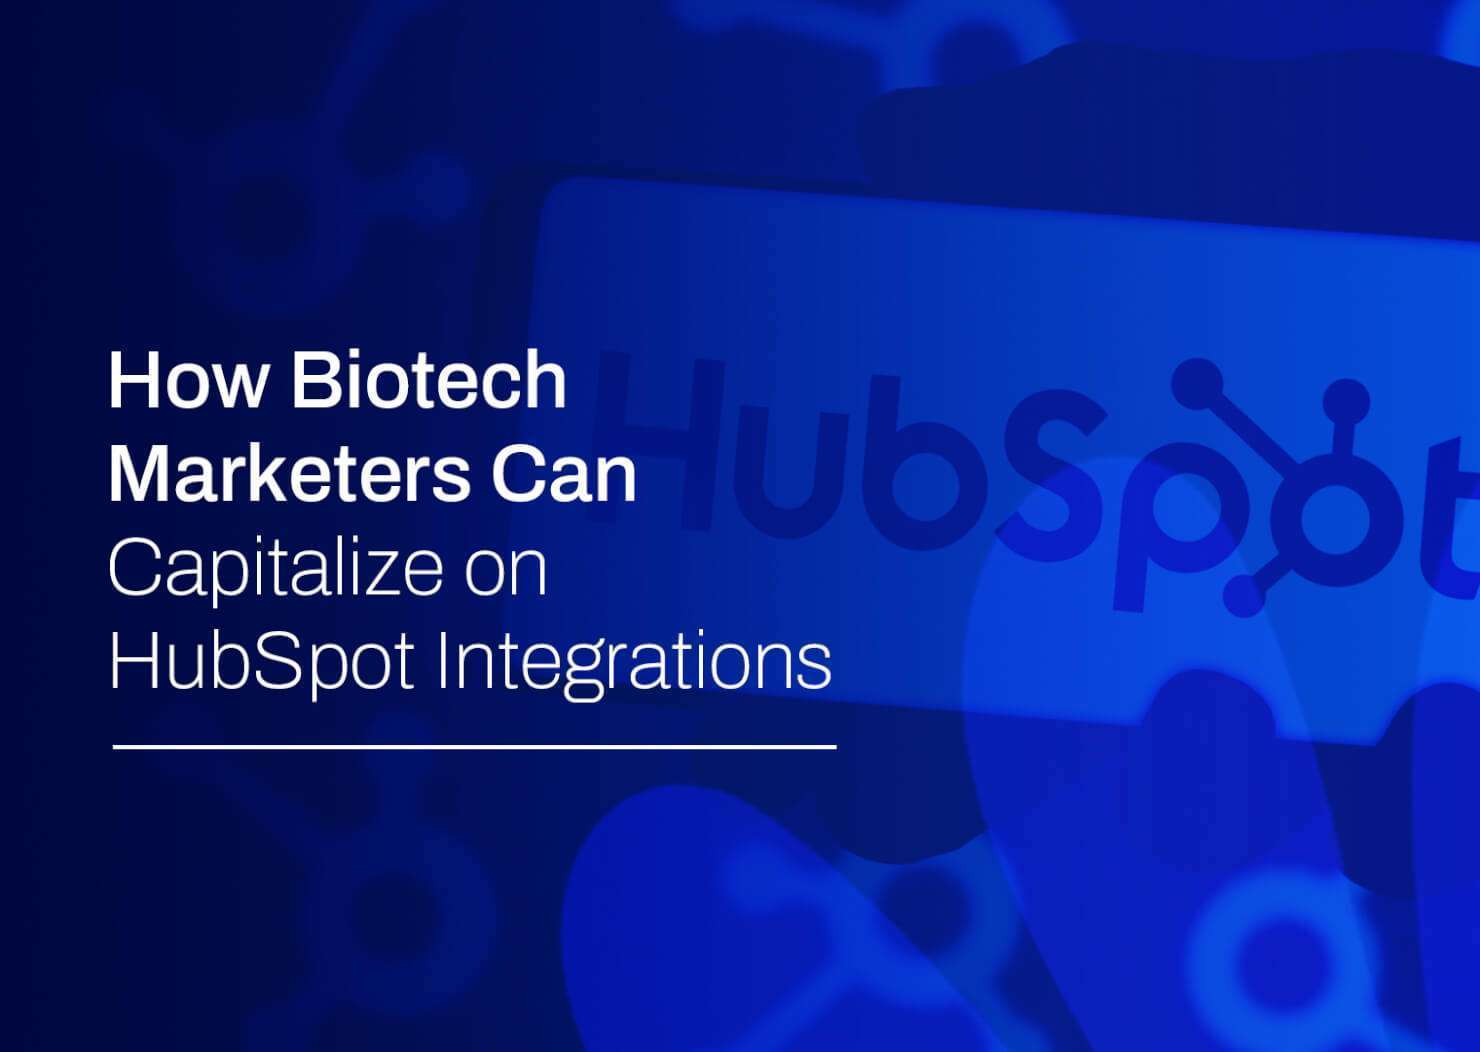 How Biotech Marketers Can Capitalize on HubSpot Integrations